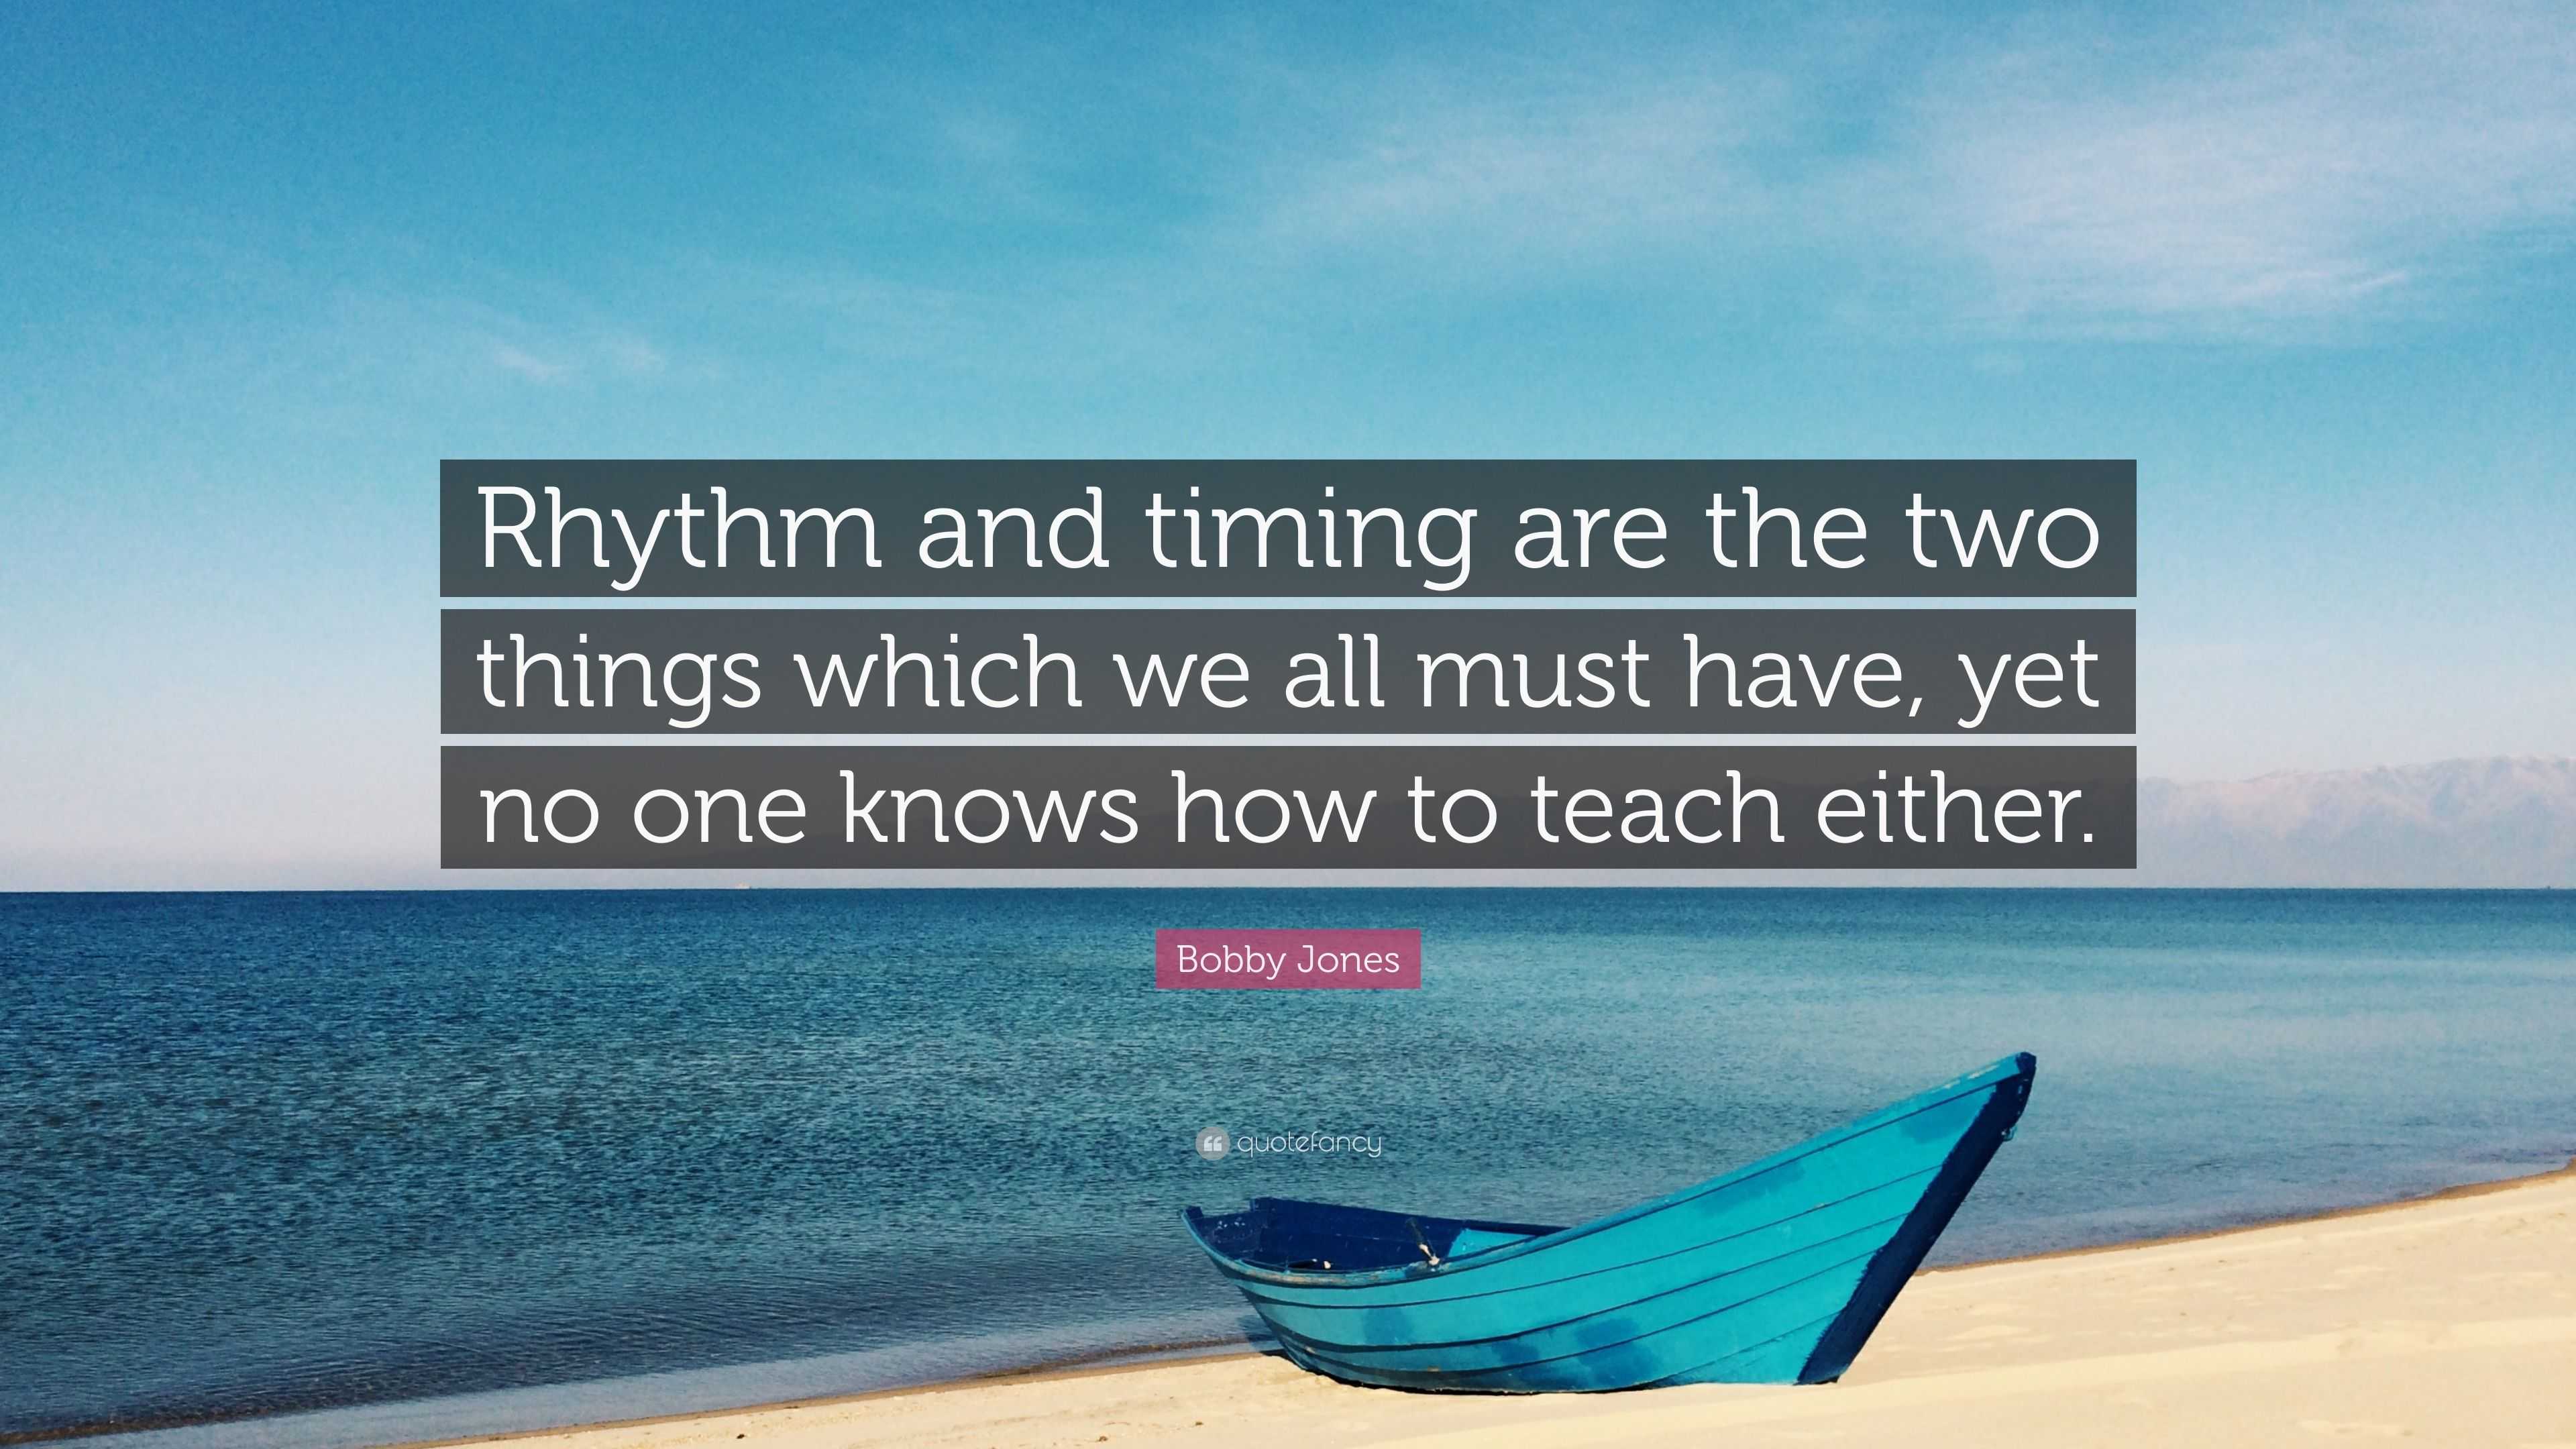 https://quotefancy.com/media/wallpaper/3840x2160/5191078-Bobby-Jones-Quote-Rhythm-and-timing-are-the-two-things-which-we.jpg